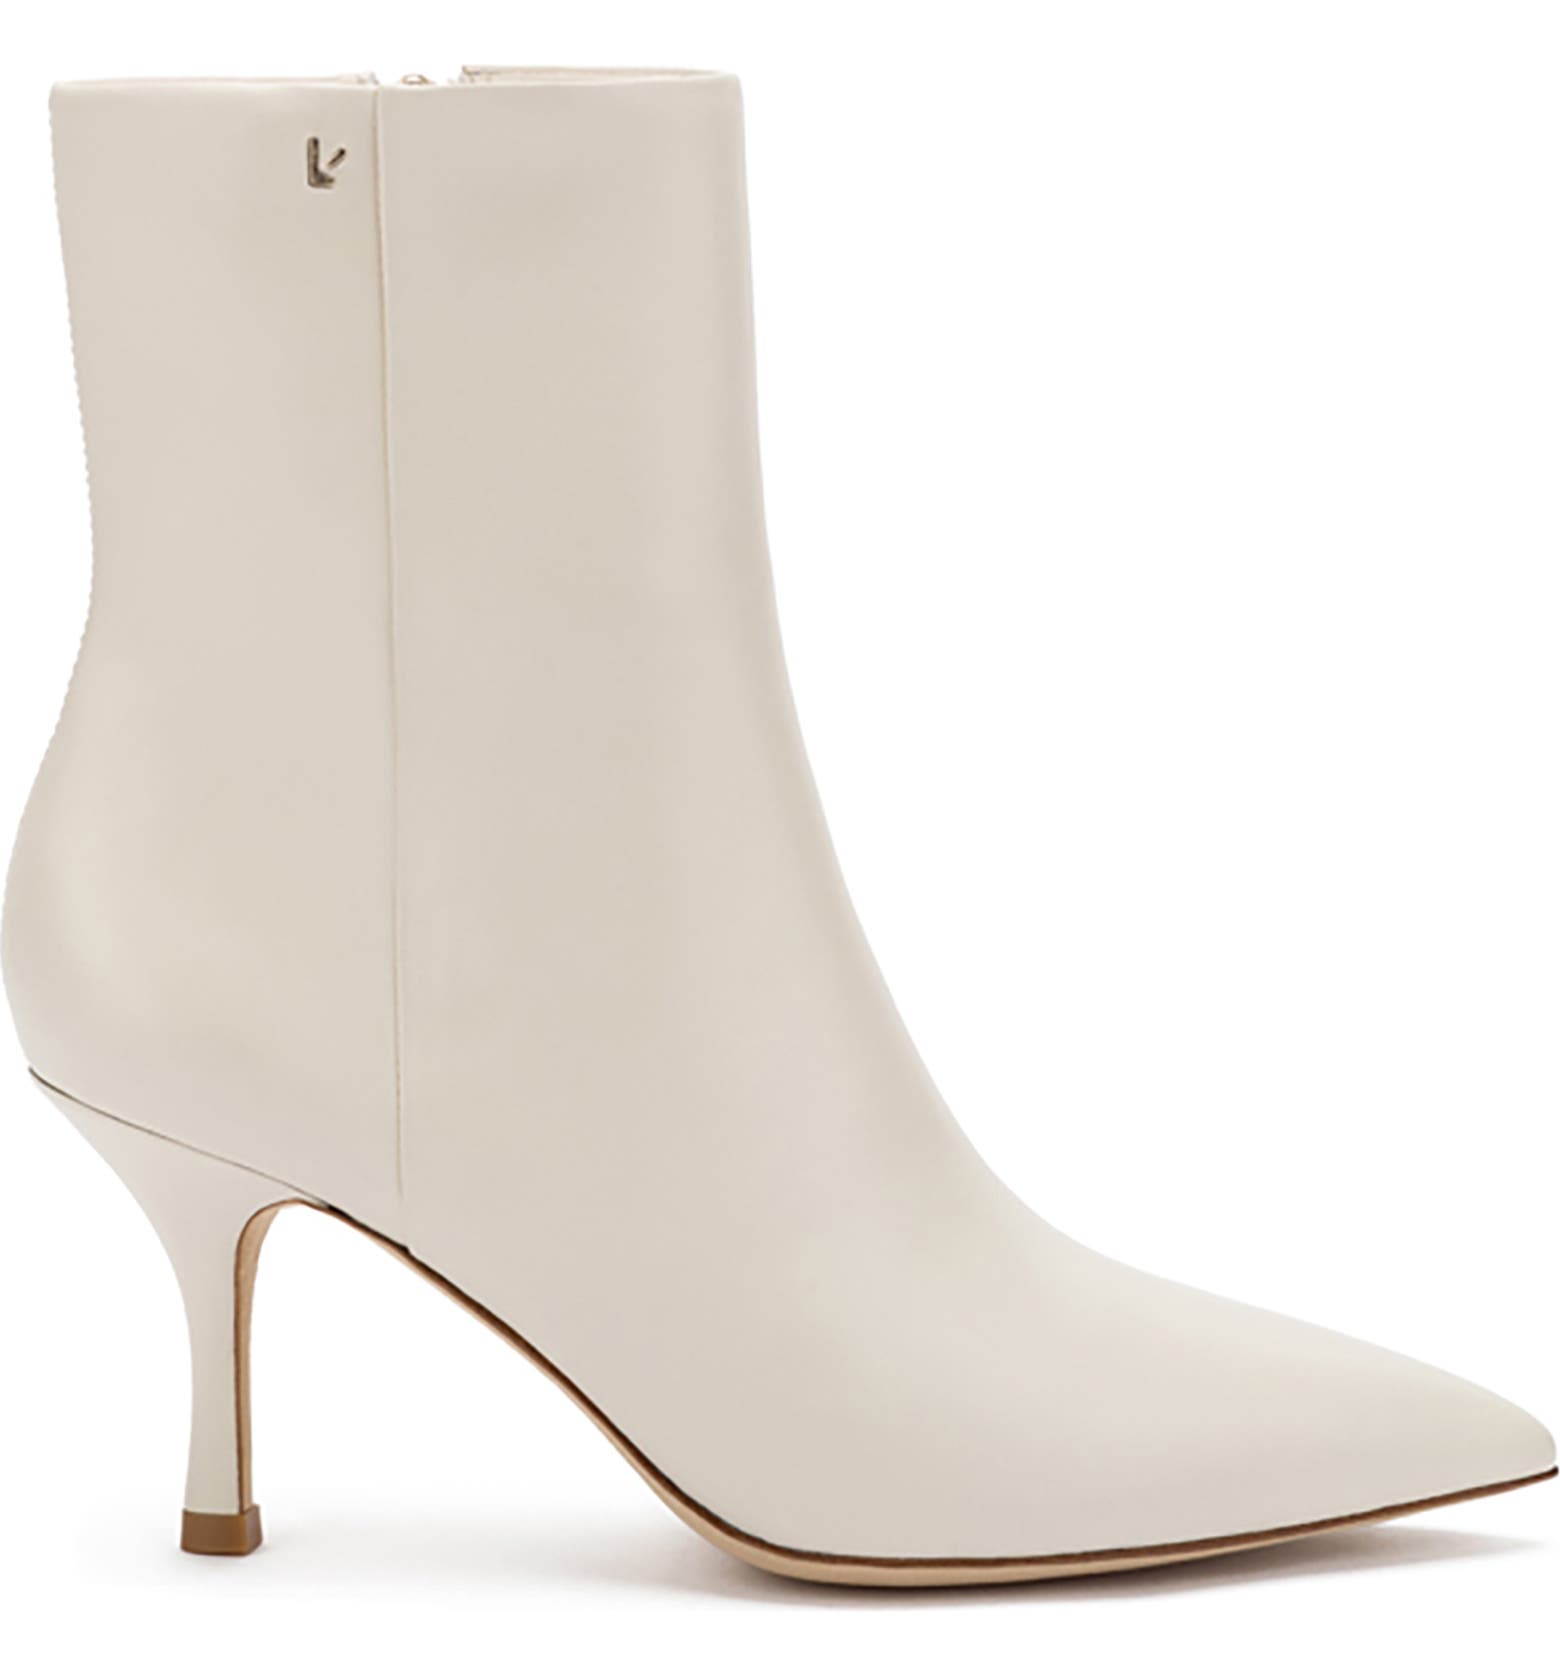 White ankle boots with heel